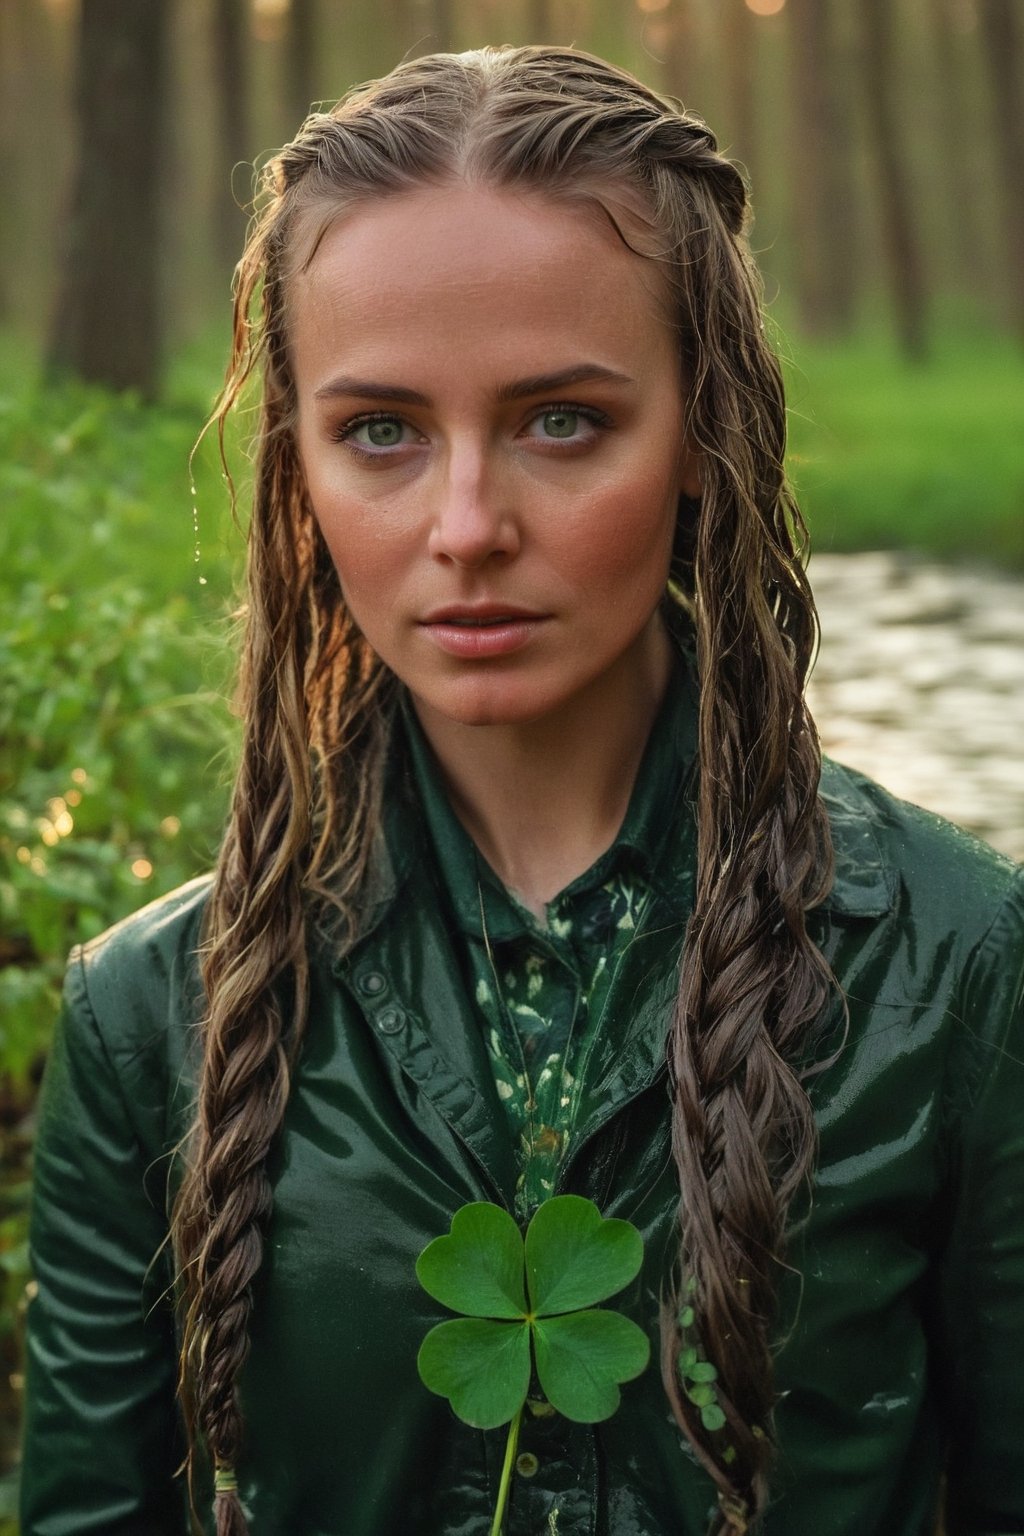 35 year old wet female leprechaun in a lush snowy forest at sunrise, long flowing wet braided hair, warmth, determination, poise, eyes glimmering with warm hues, wet clothes adorned with a geometric four leaf clover pattern, perfect eyes, perfect anatomy, artistic composition, masterpiece quality, high-detail, realistic skin texture, captured with Sony A7R IV, Sony FE 50mm f/1.2 GM lens, bathed in warm natural light, ultra-realistic,soakingwetclothes